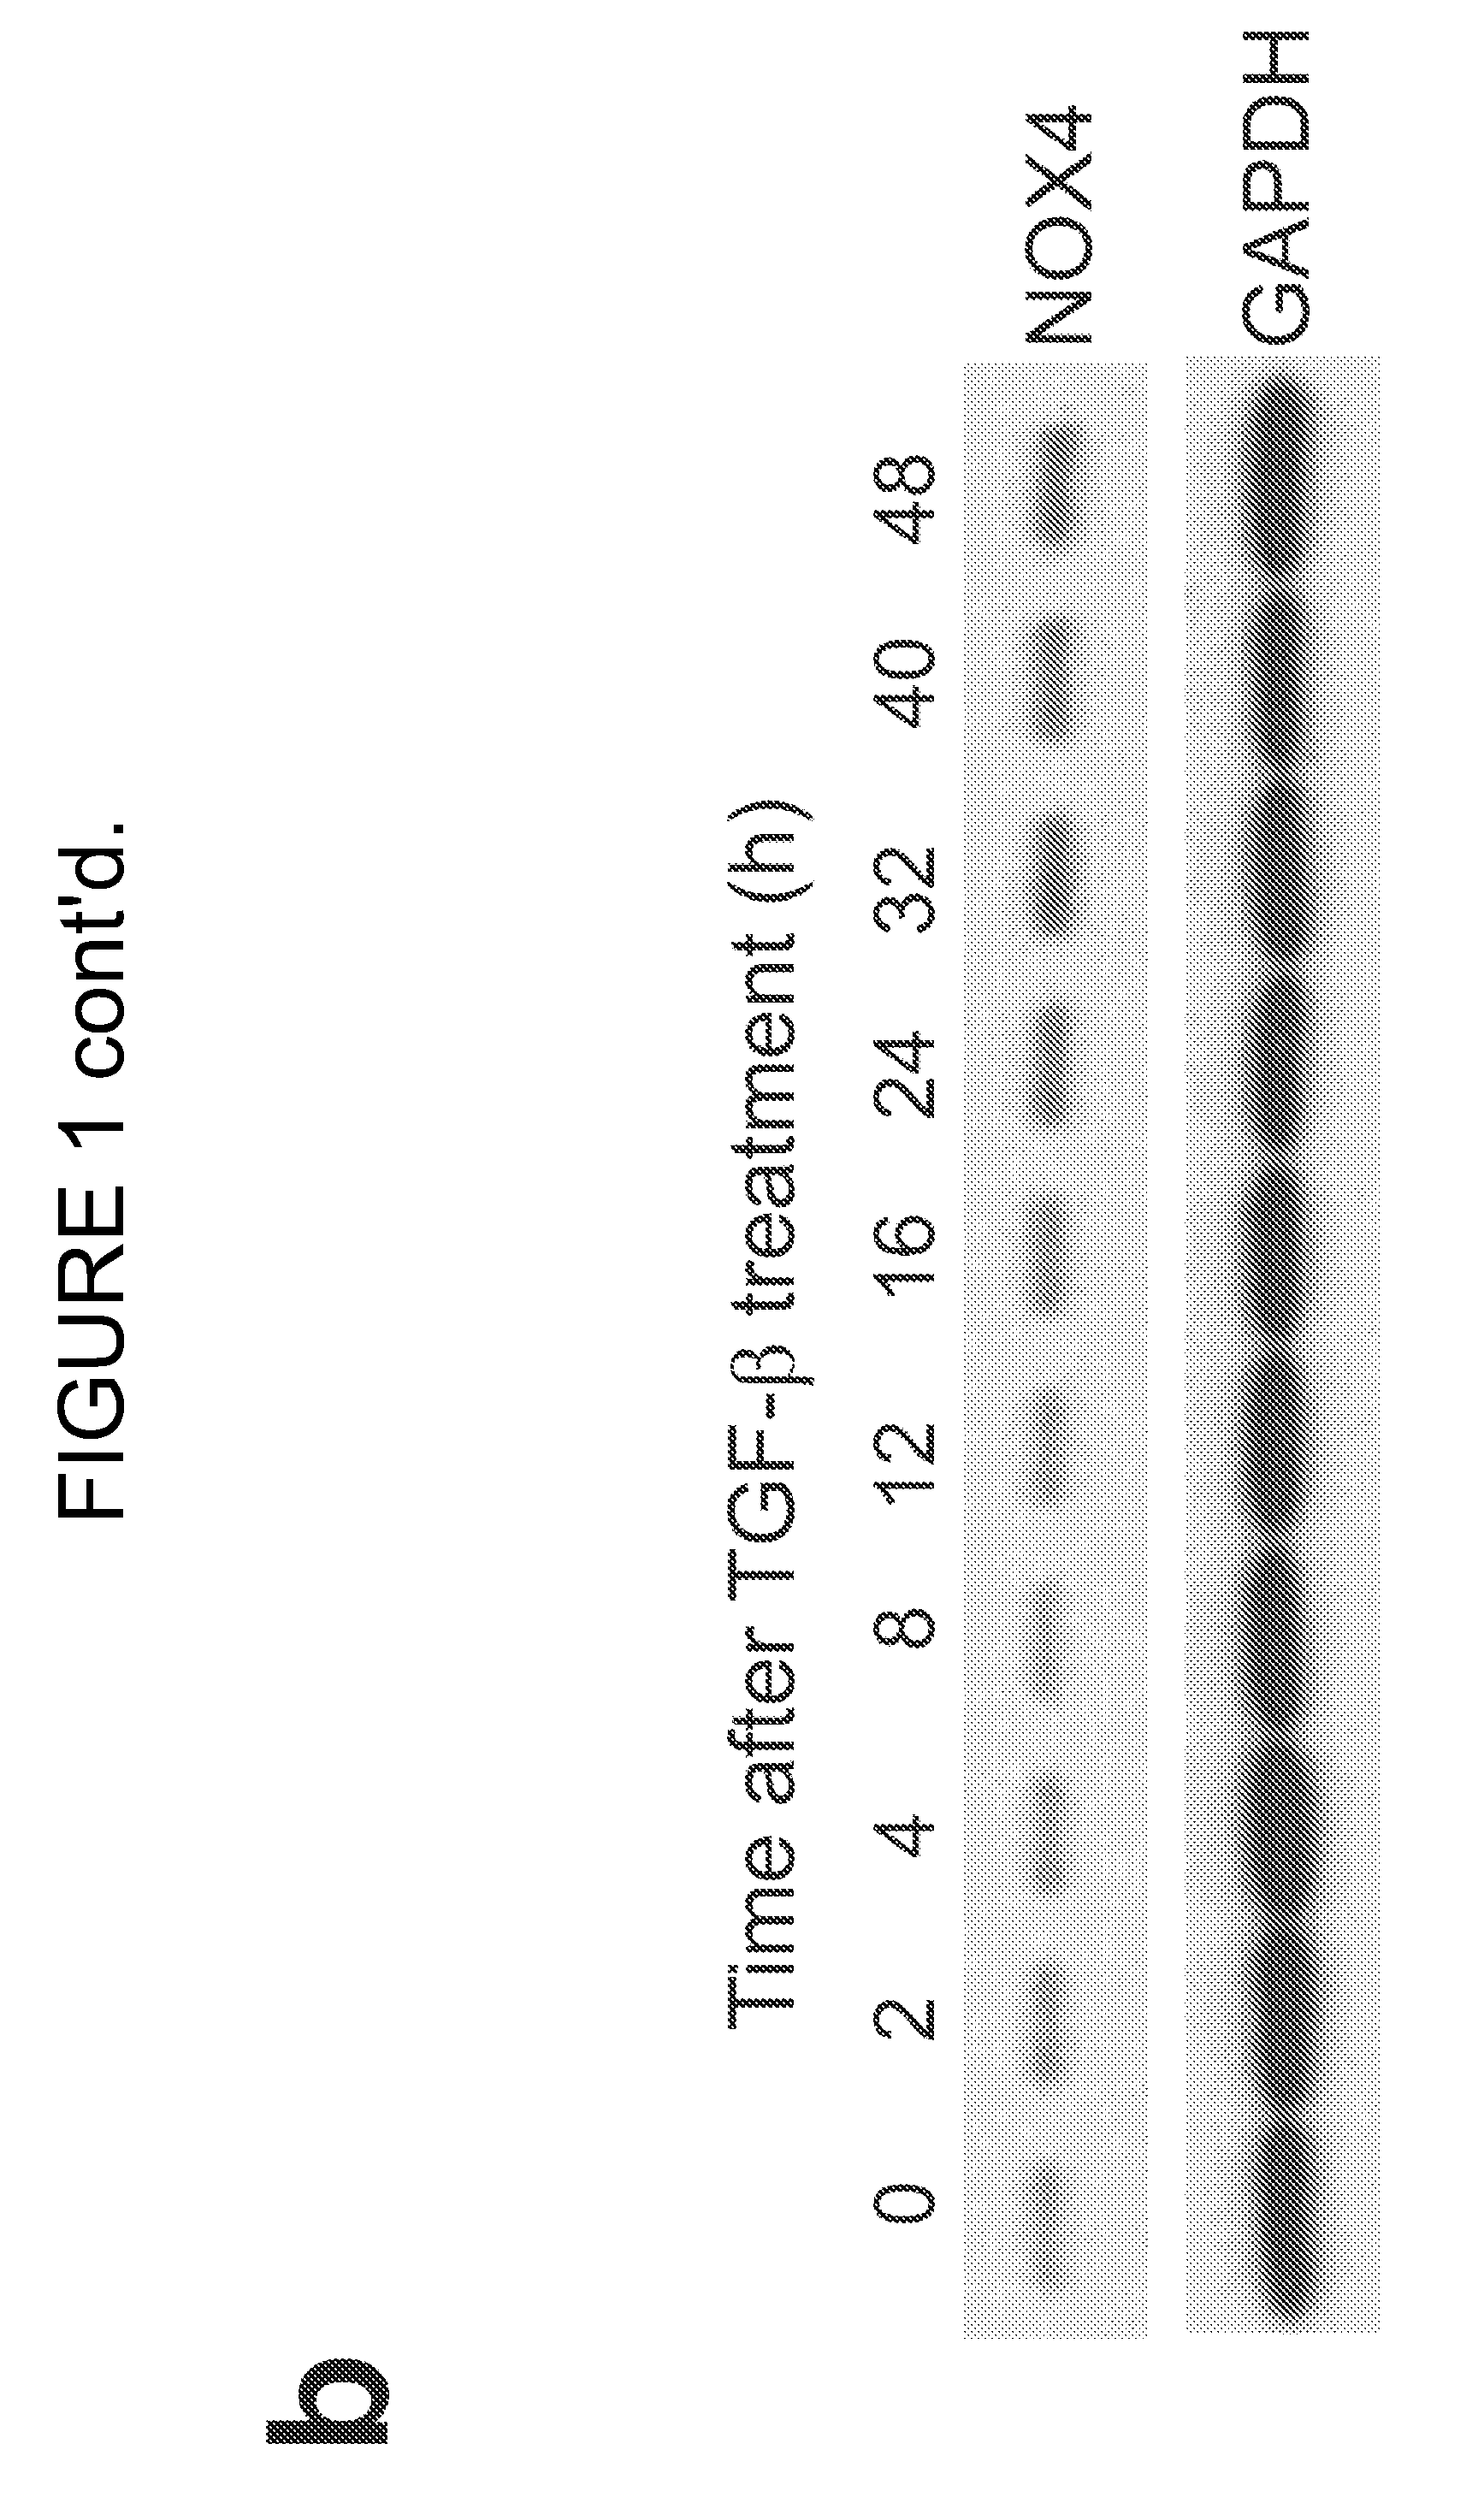 Compositions and methods for diagnosing and treating fibrotic disorders